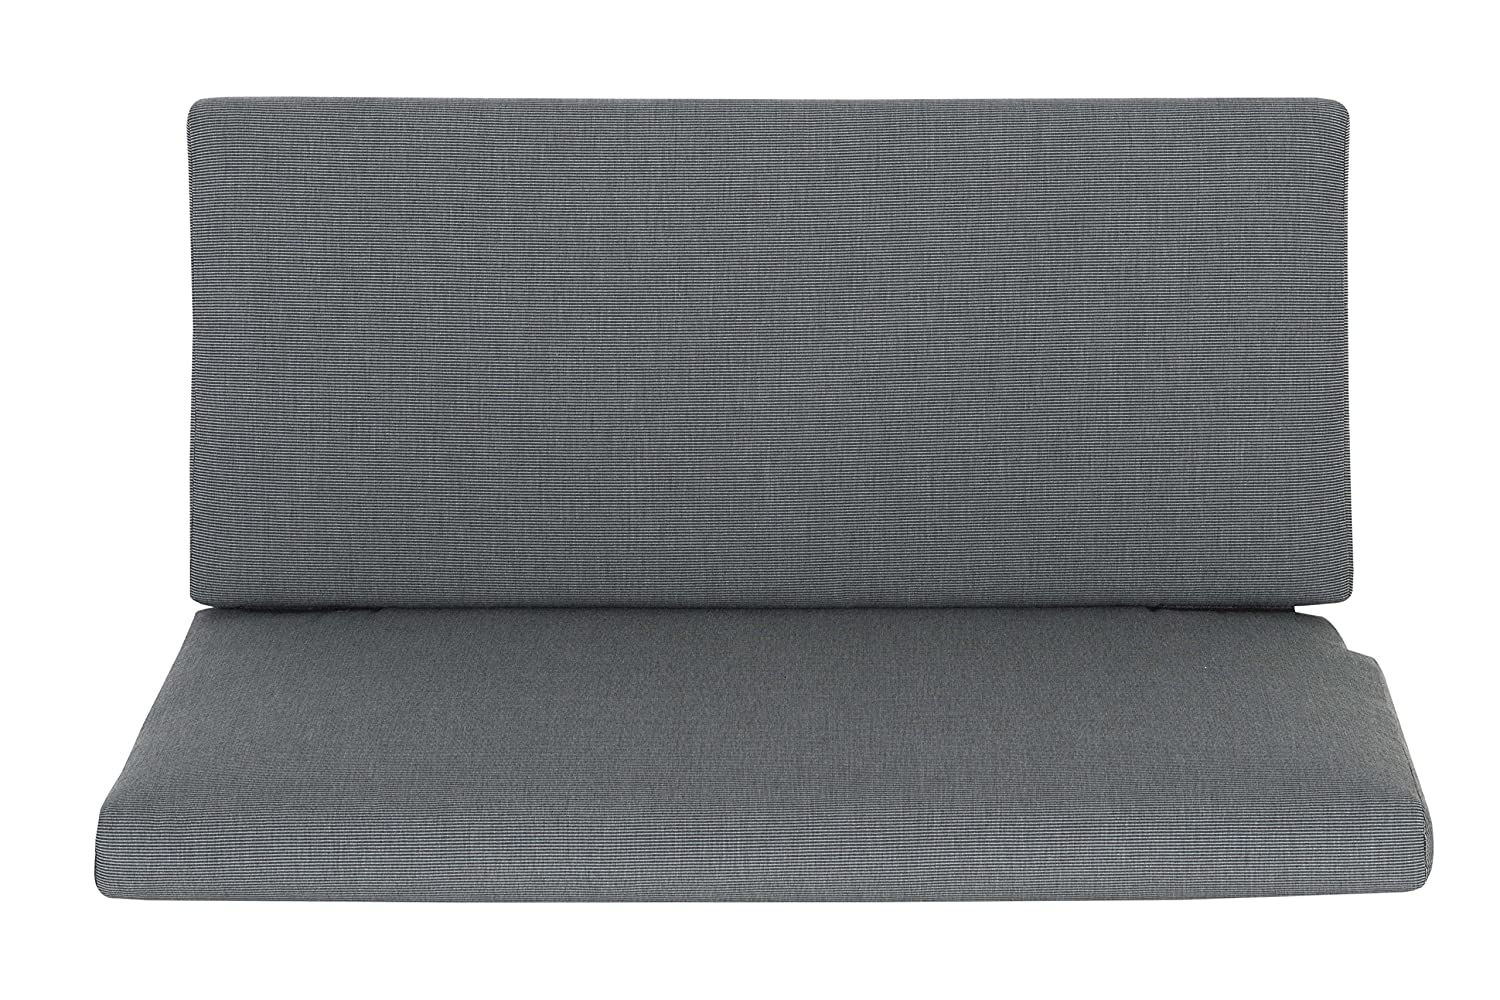 Schardt 09 051 00 00 Cushion Holly Fabric Seat and Back, Grey